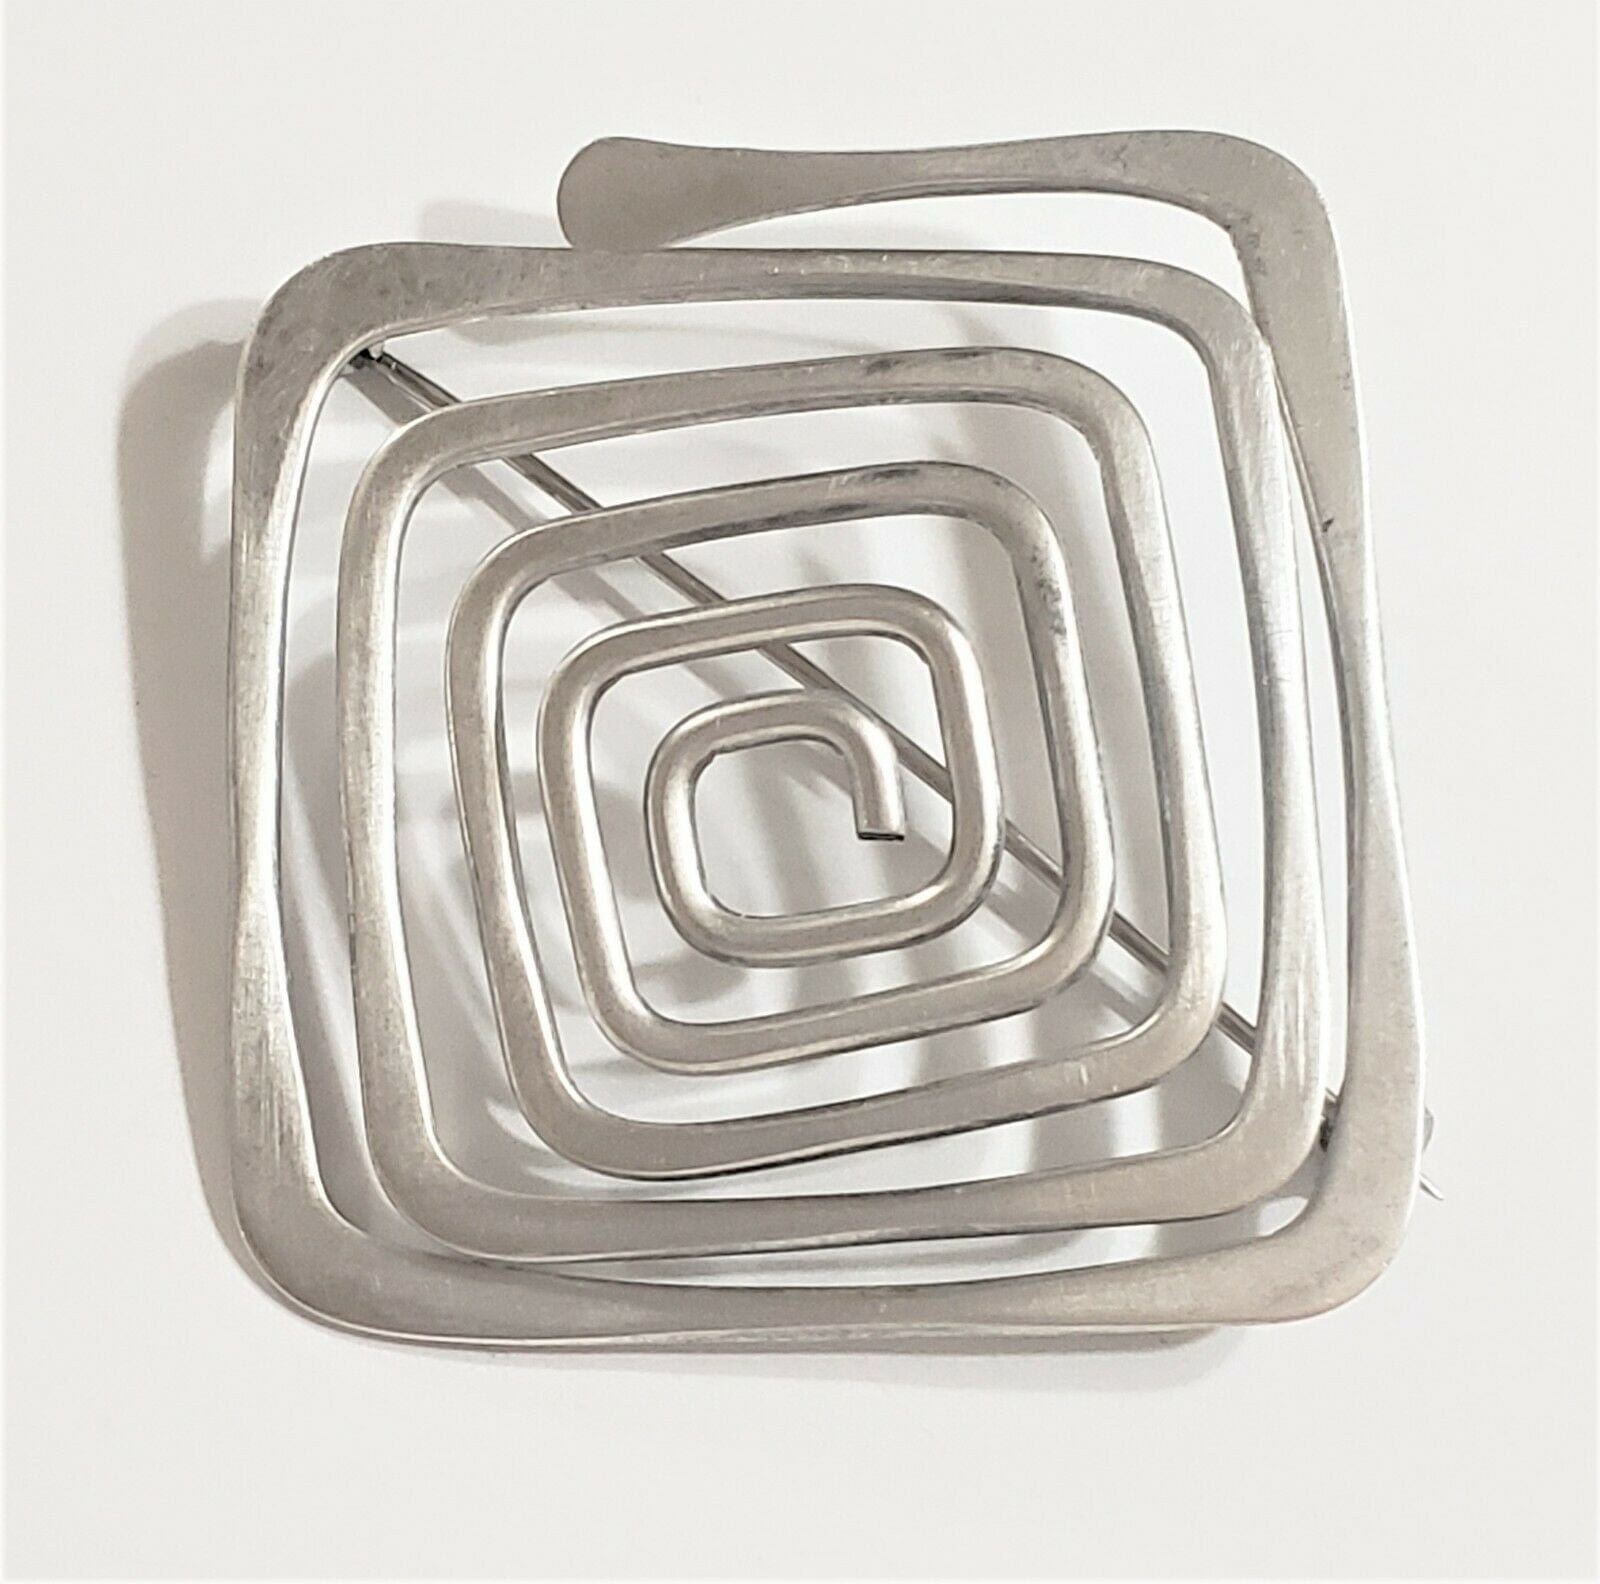 Ed Wiener Jewelry VNTG Iconic Ed Wiener 925 Sterling MODERNIST Spiral Square Brooch Circa 1950 FAB